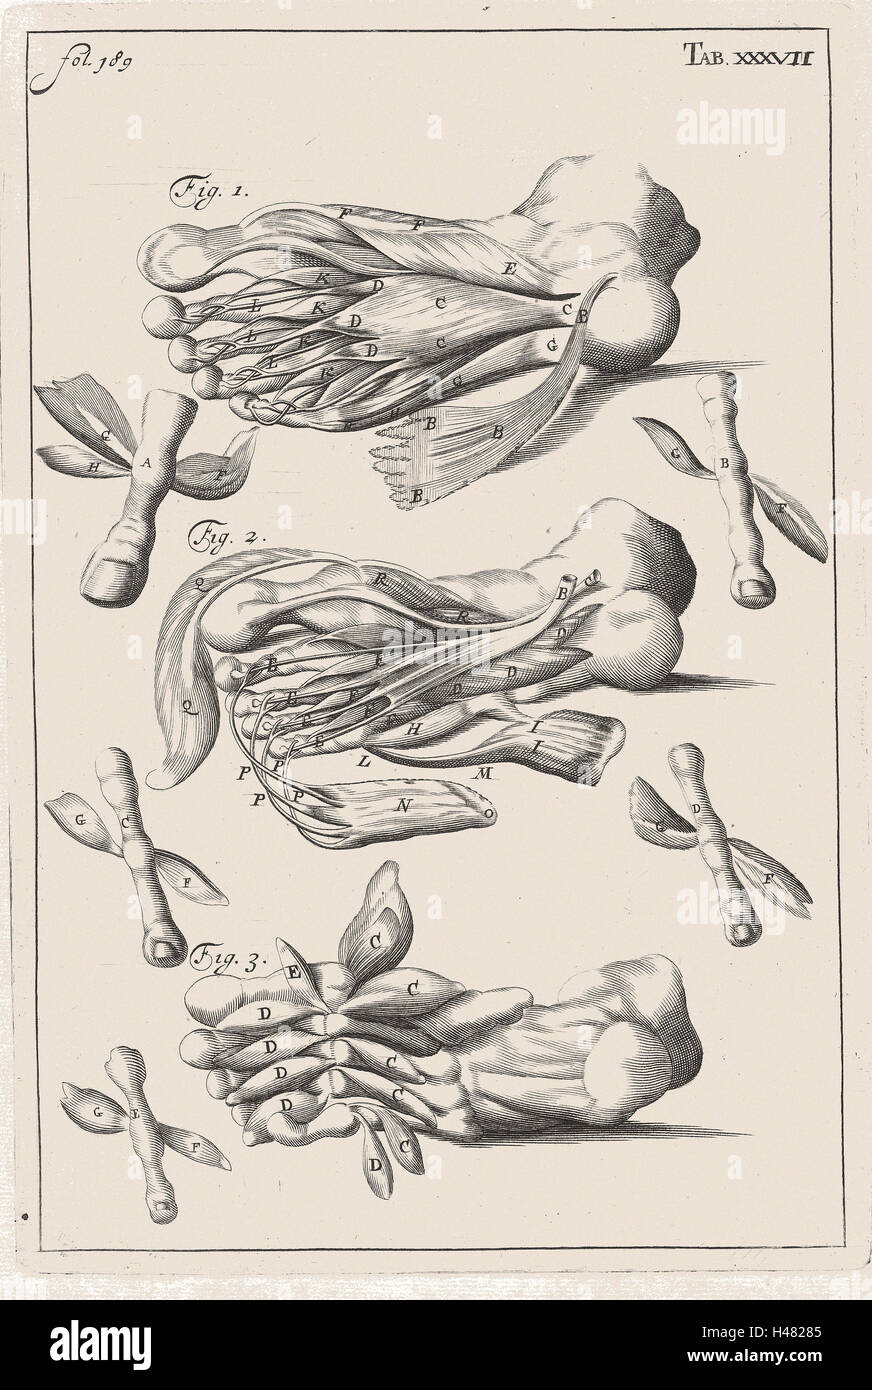 Anatomical illustration showing muscles of the foot Stock Photo